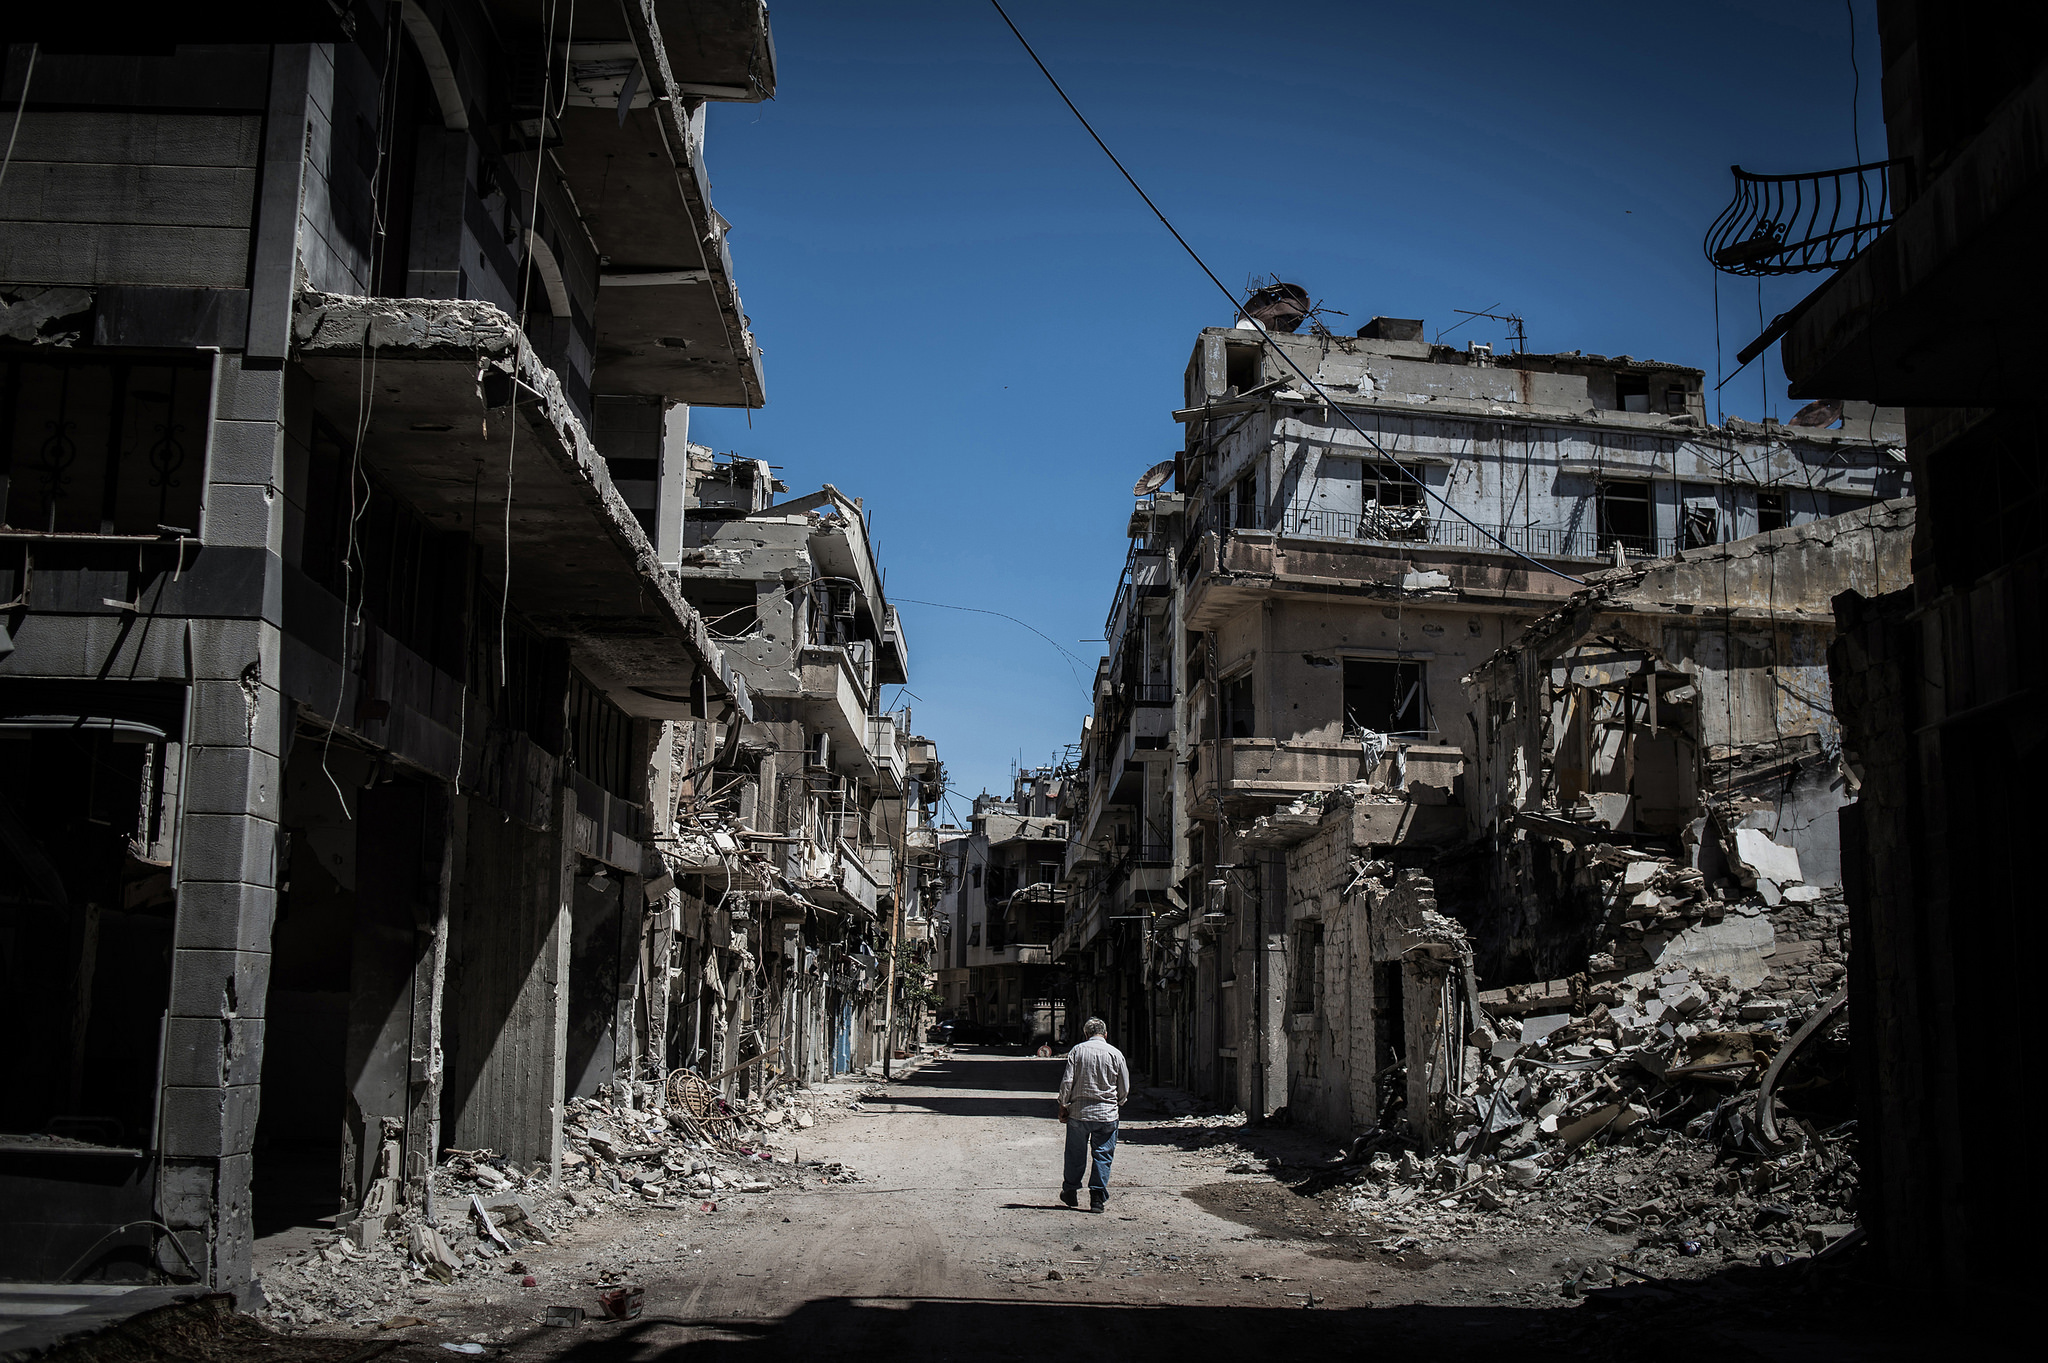 A Syrian refugee walks among severely damaged buildings in downtown Homs, Syria in 2014 (Pan Chaoyue/Flickr/CC BY-NC-ND 2.0)